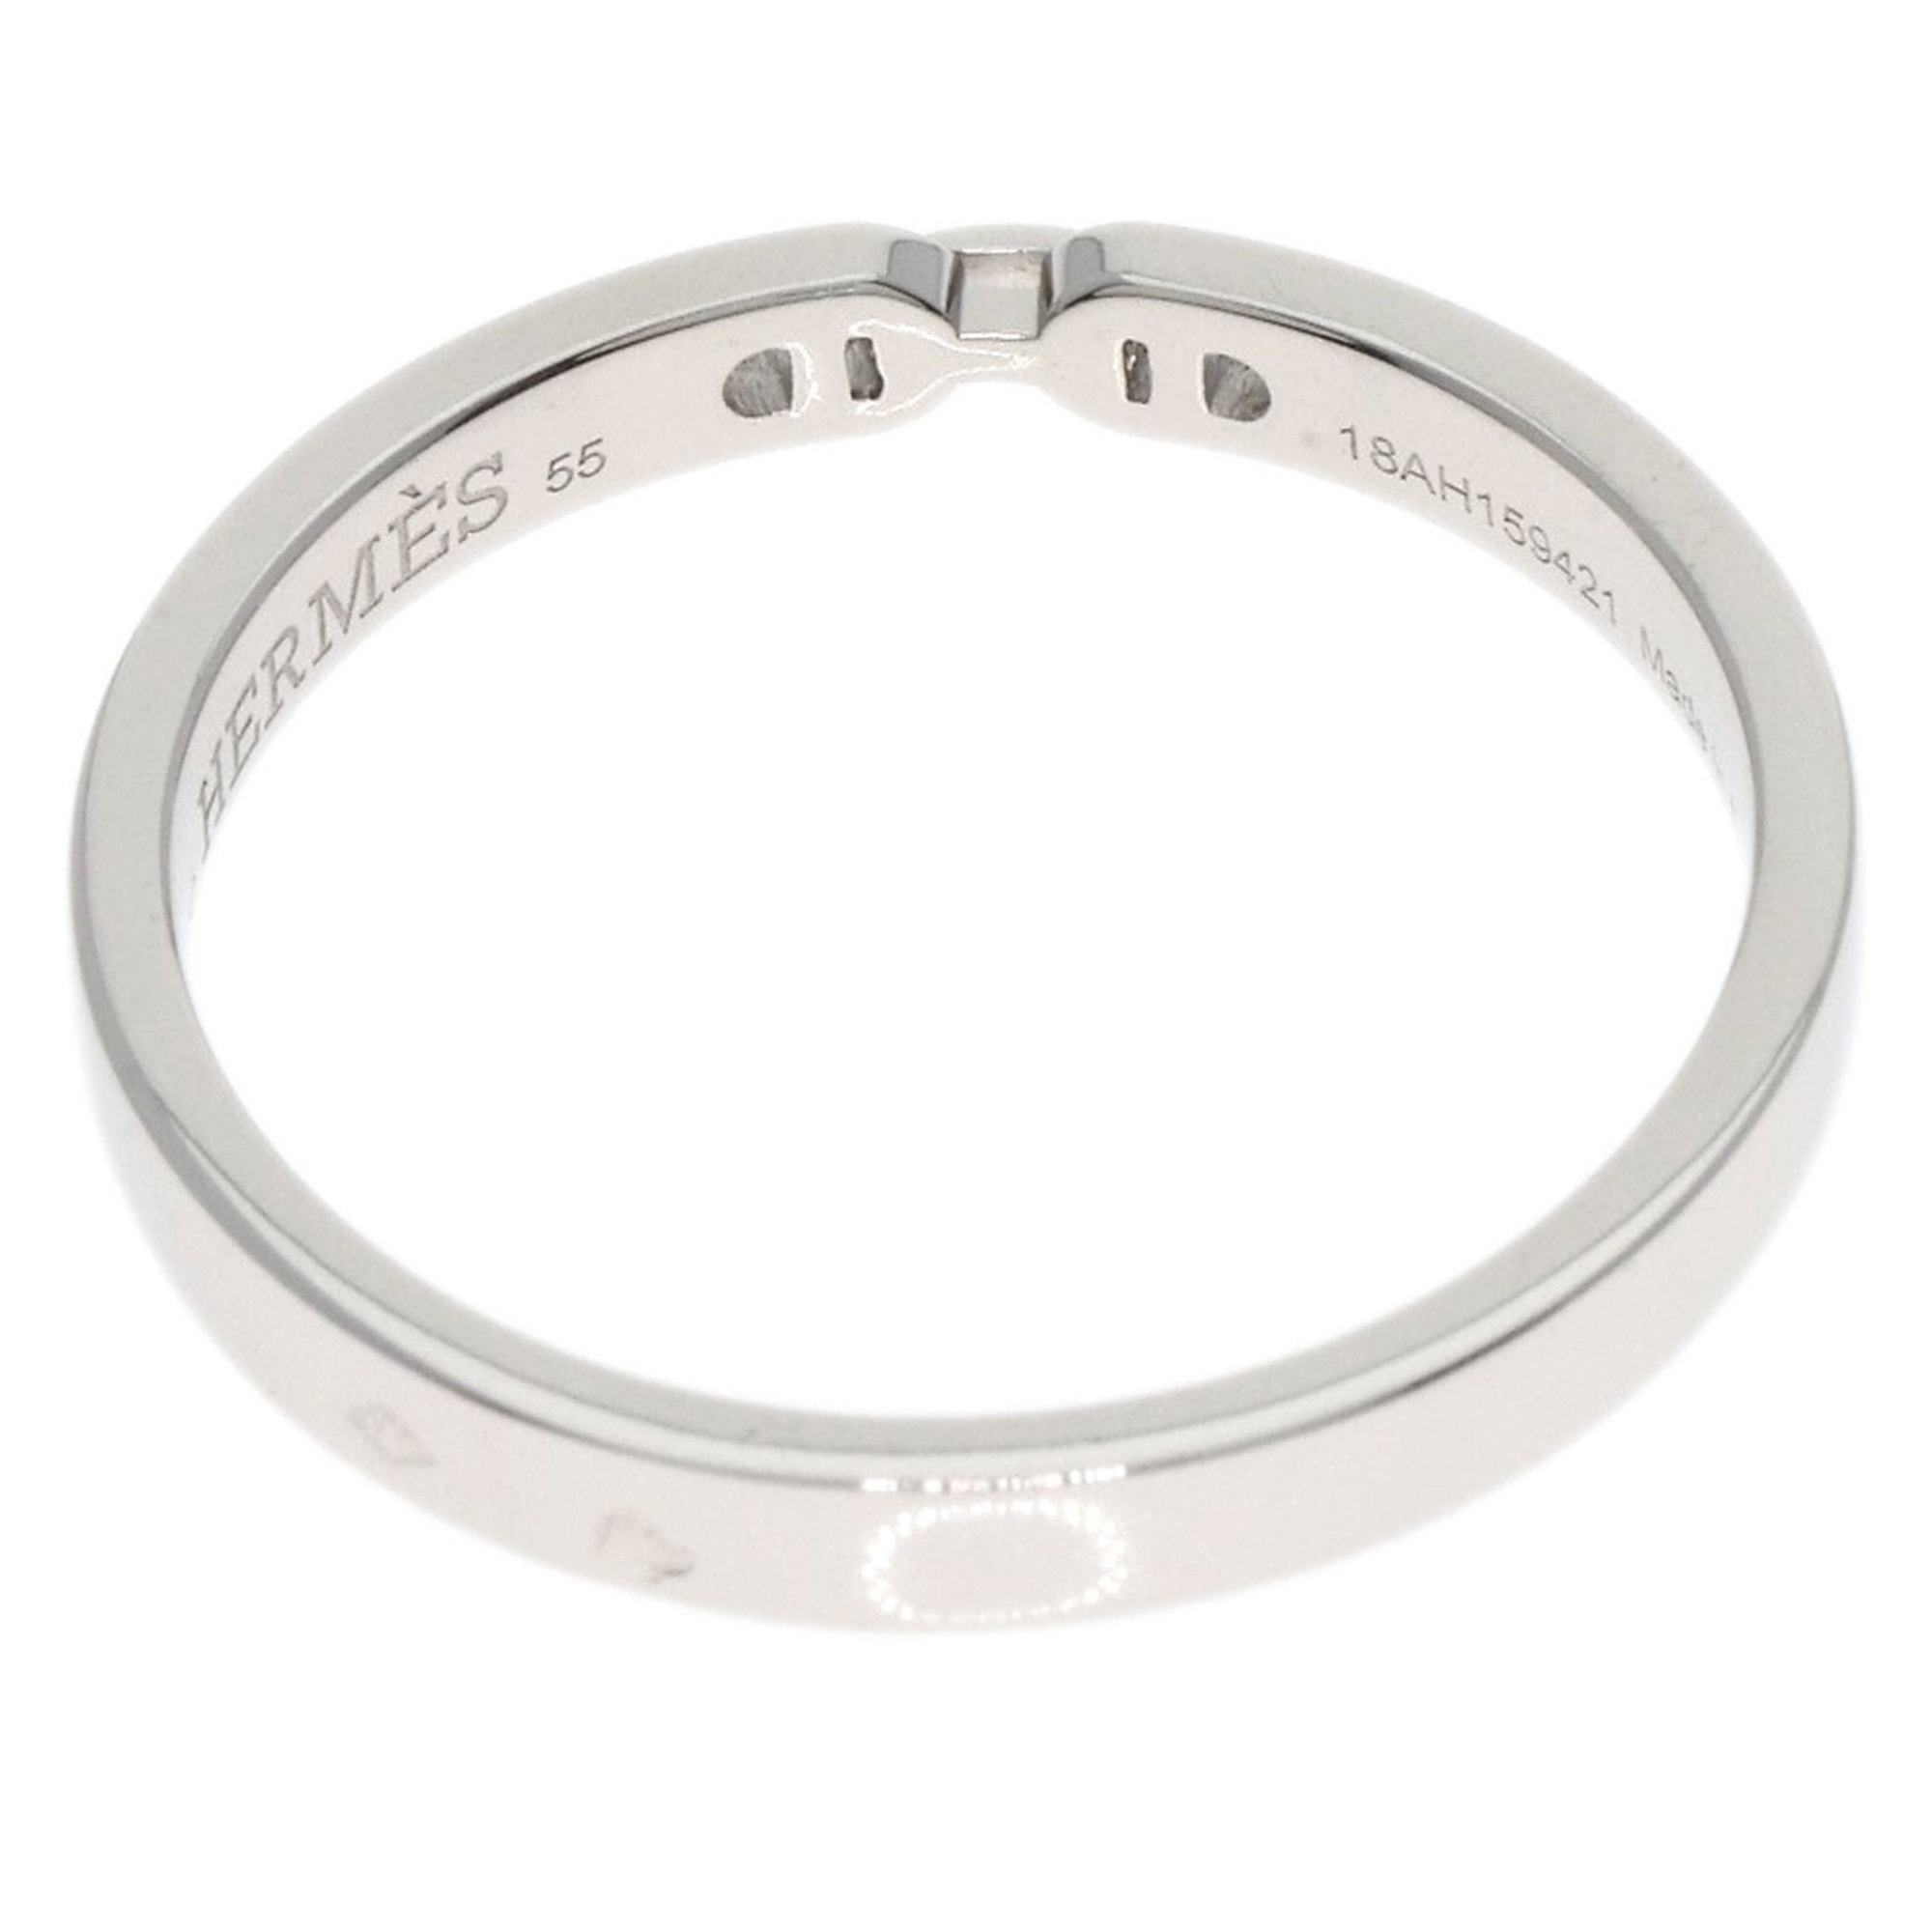 Hermes Ever Chaine d'Ancre PM #55 Ring, Platinum PT950, Women's HERMES